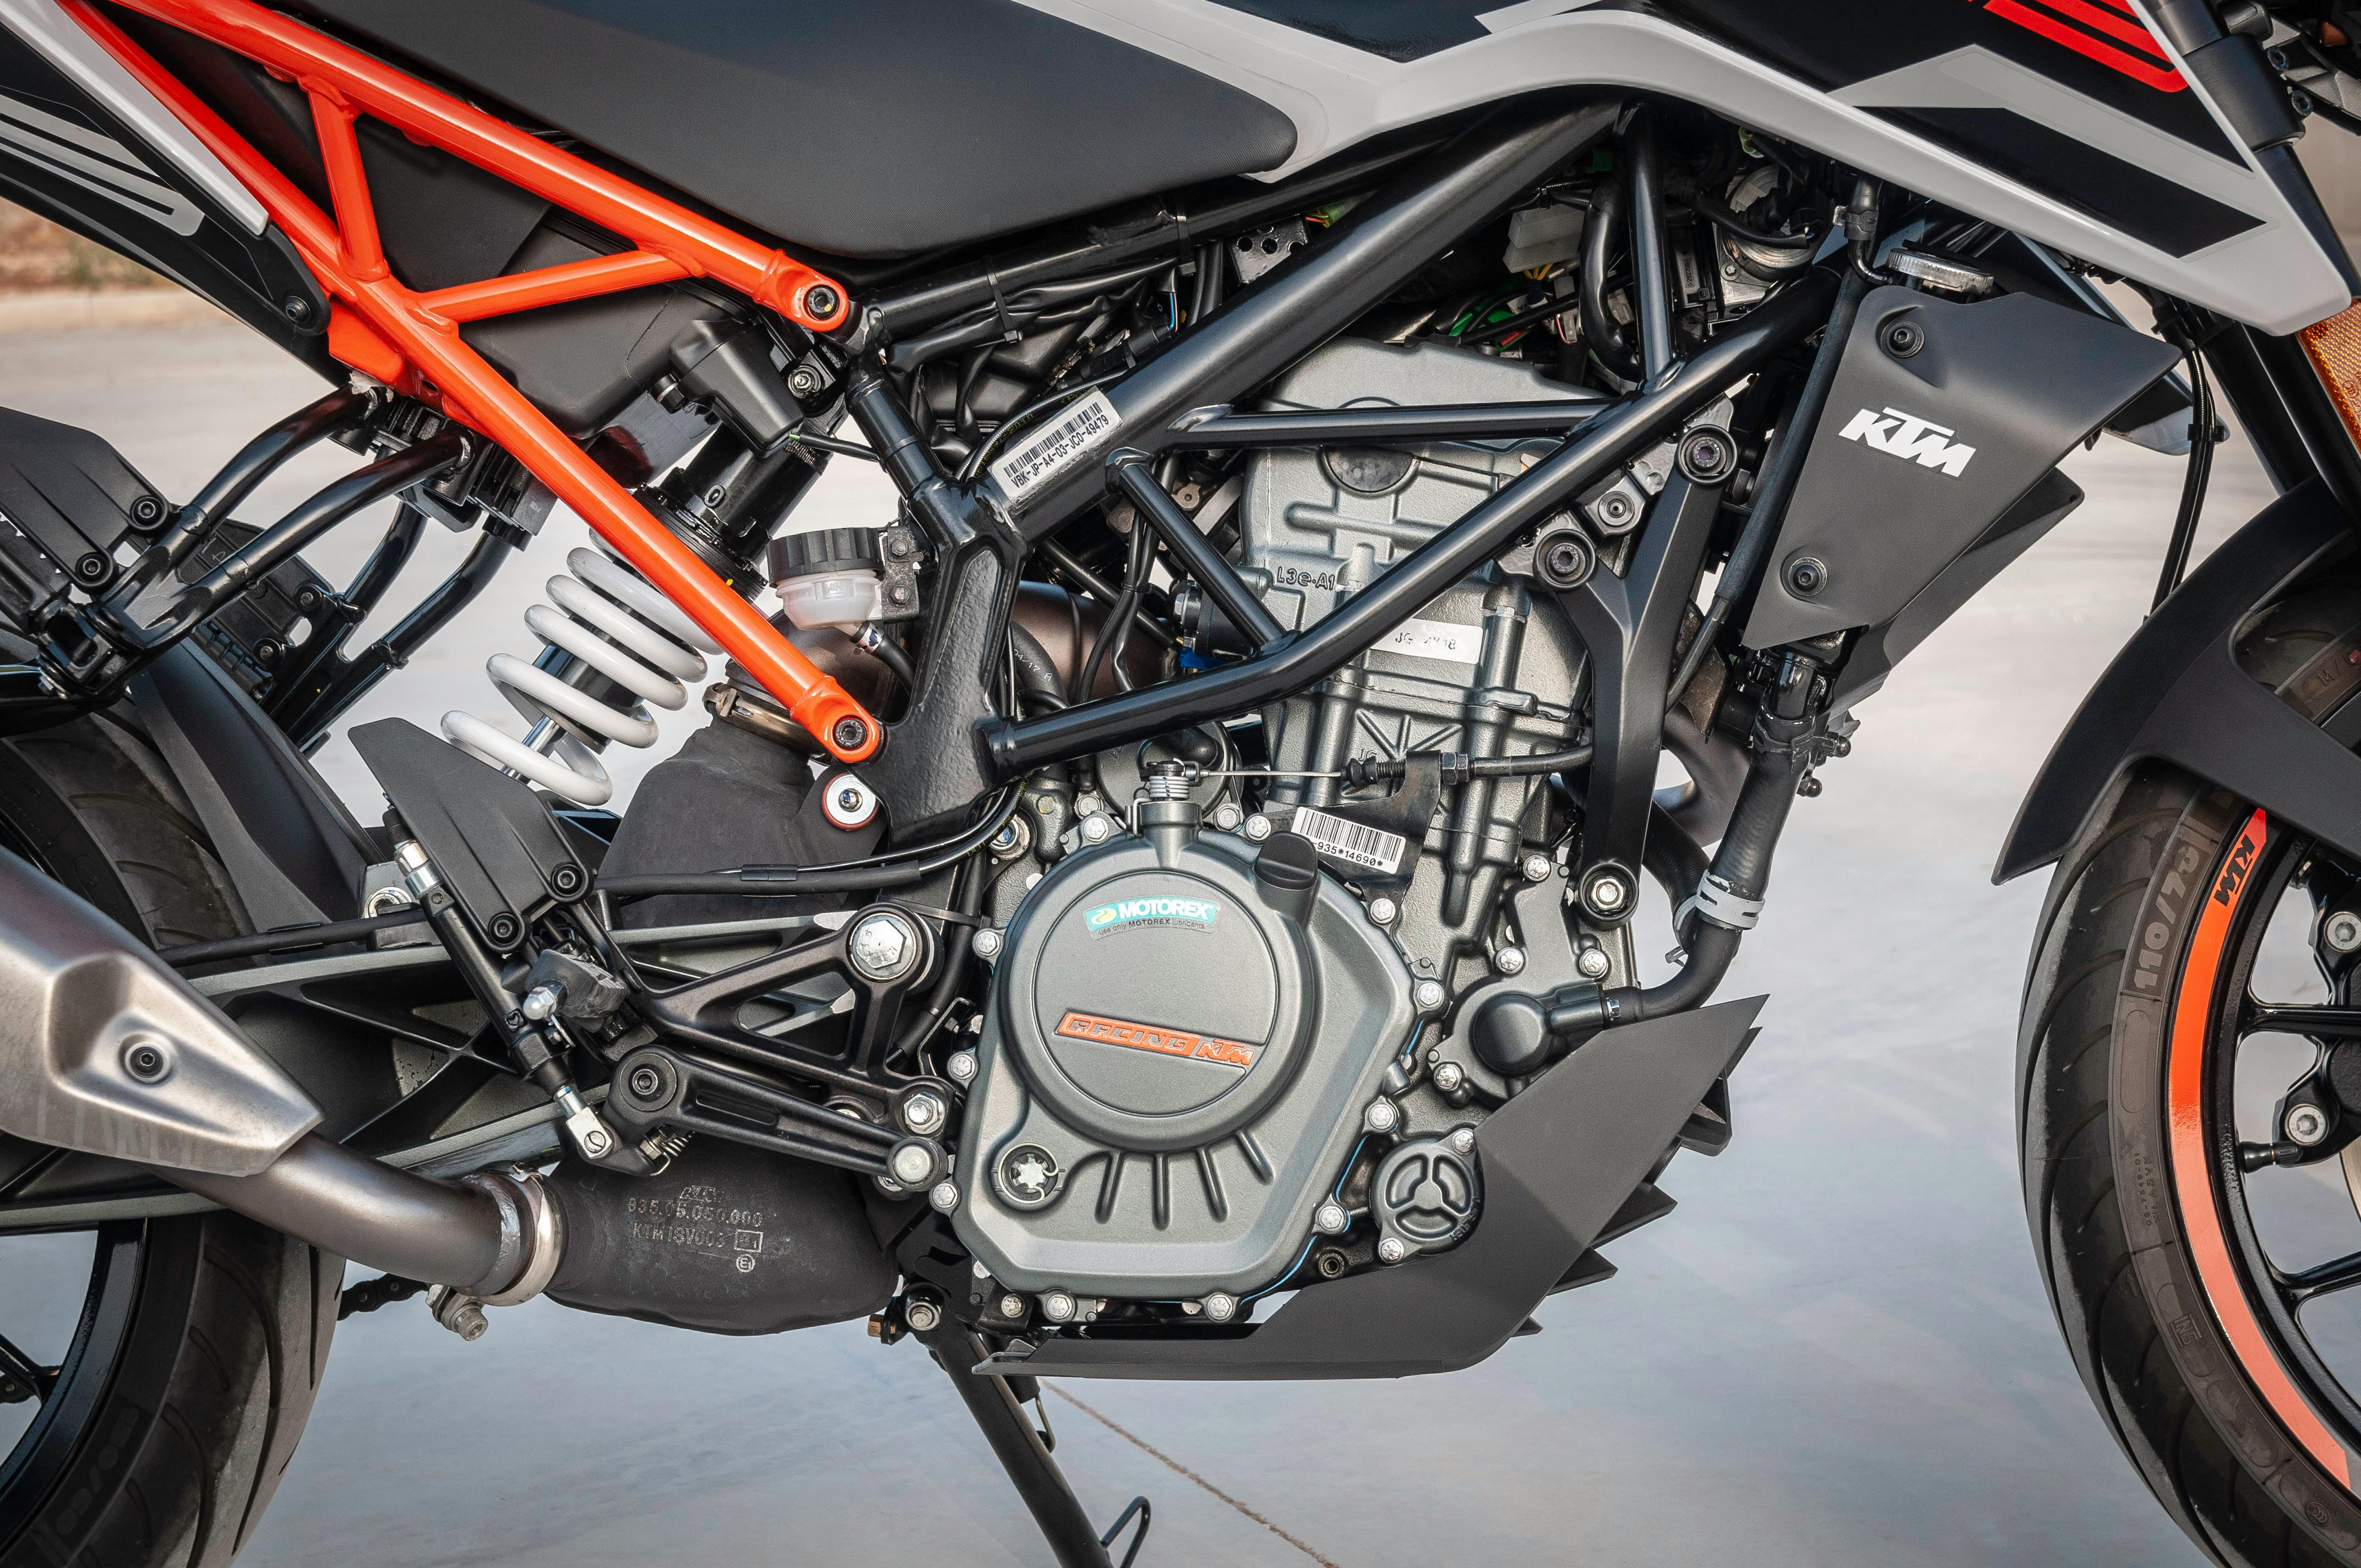 KTM Duke Electric Motorcycle to Launch Soon, Could be Made in India - News18